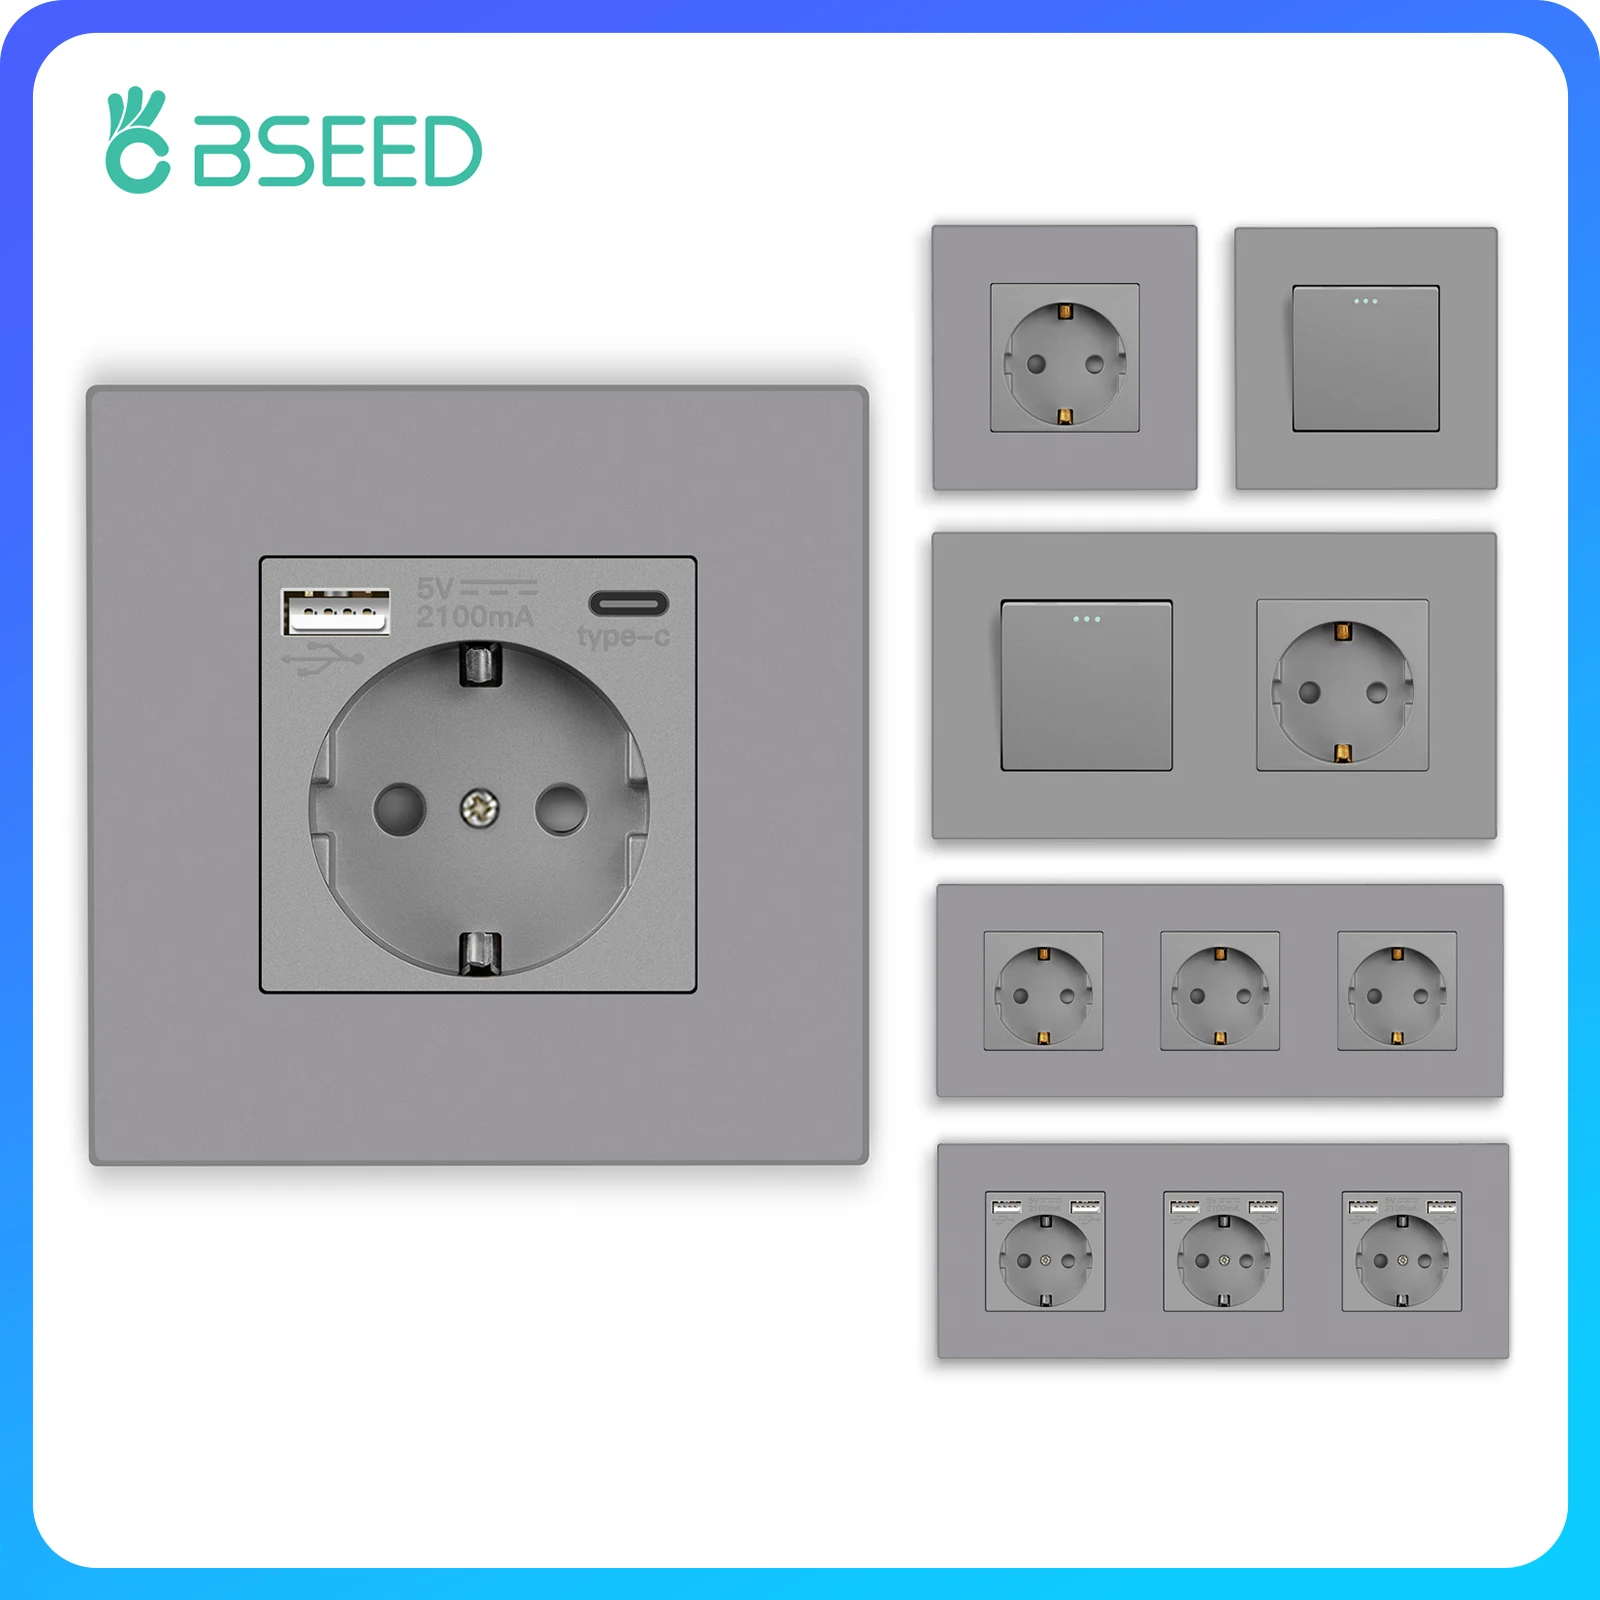 

BSEED Single EU Wall Socket Double Electric Sockets With USB Type-c Ports Triple Power Outlets Plastic Frame 16A